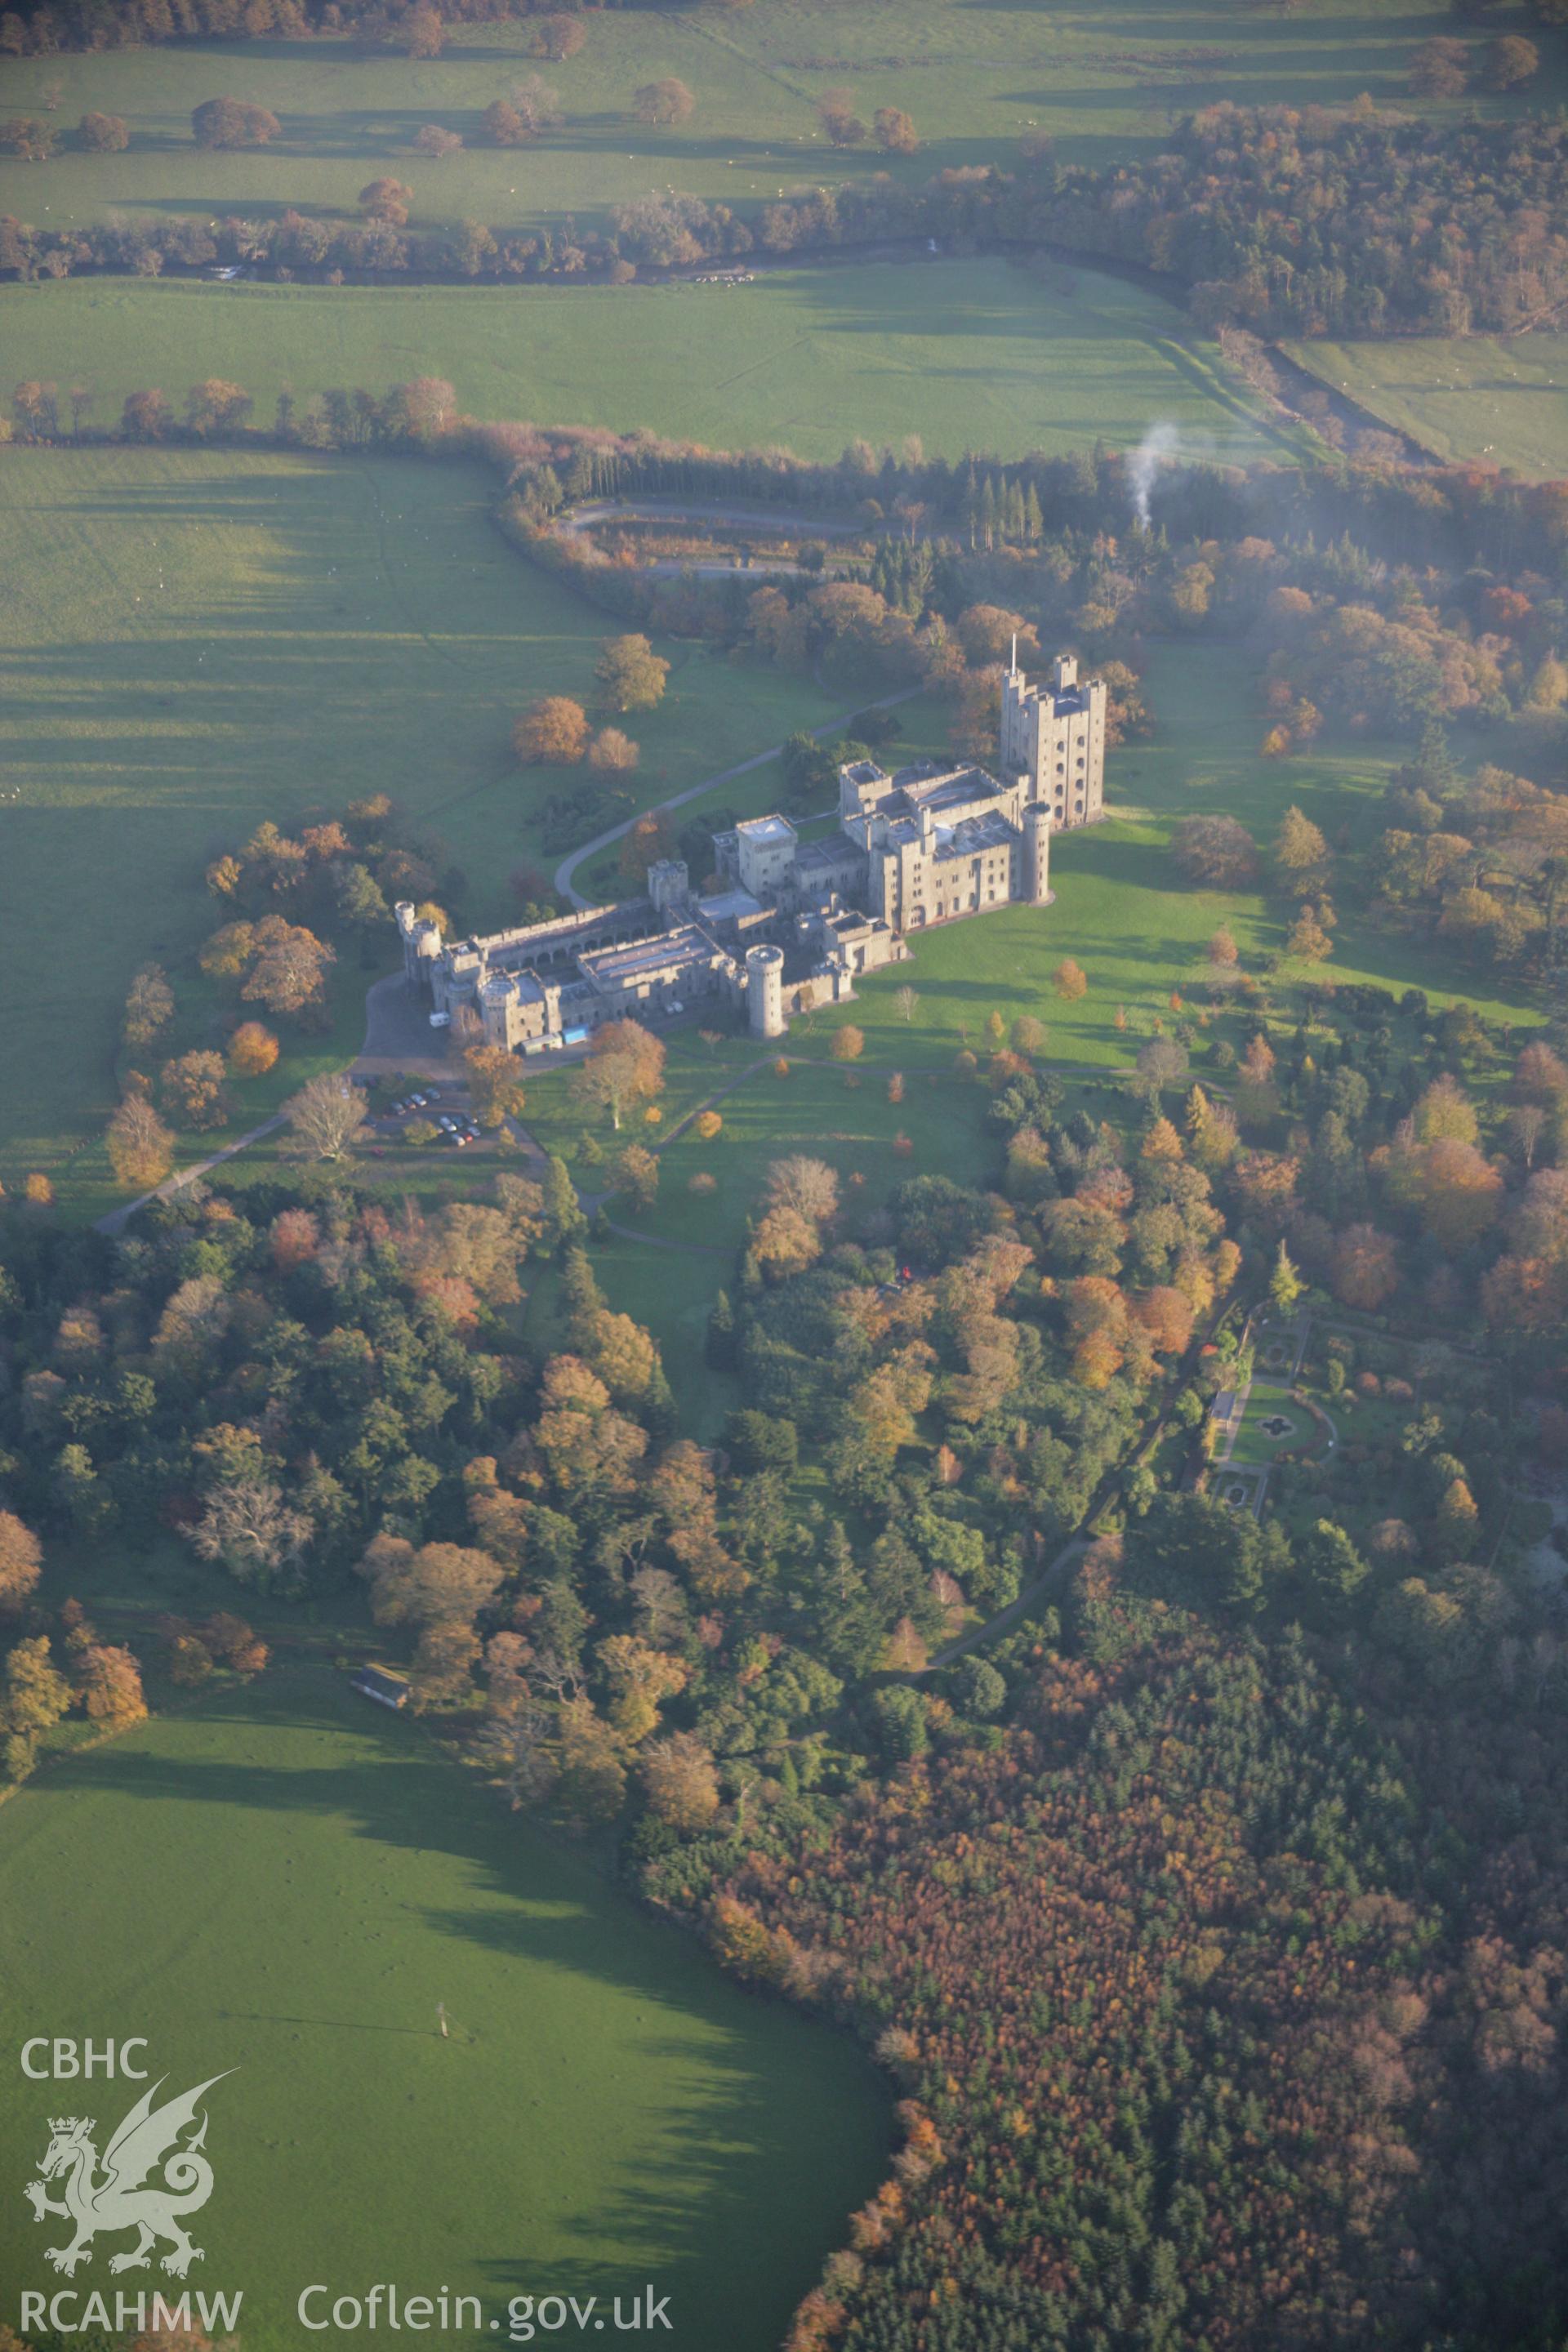 RCAHMW colour oblique aerial photograph of Penrhyn Castle, Bangor, in general view from the north-west. Taken on 21 November 2005 by Toby Driver